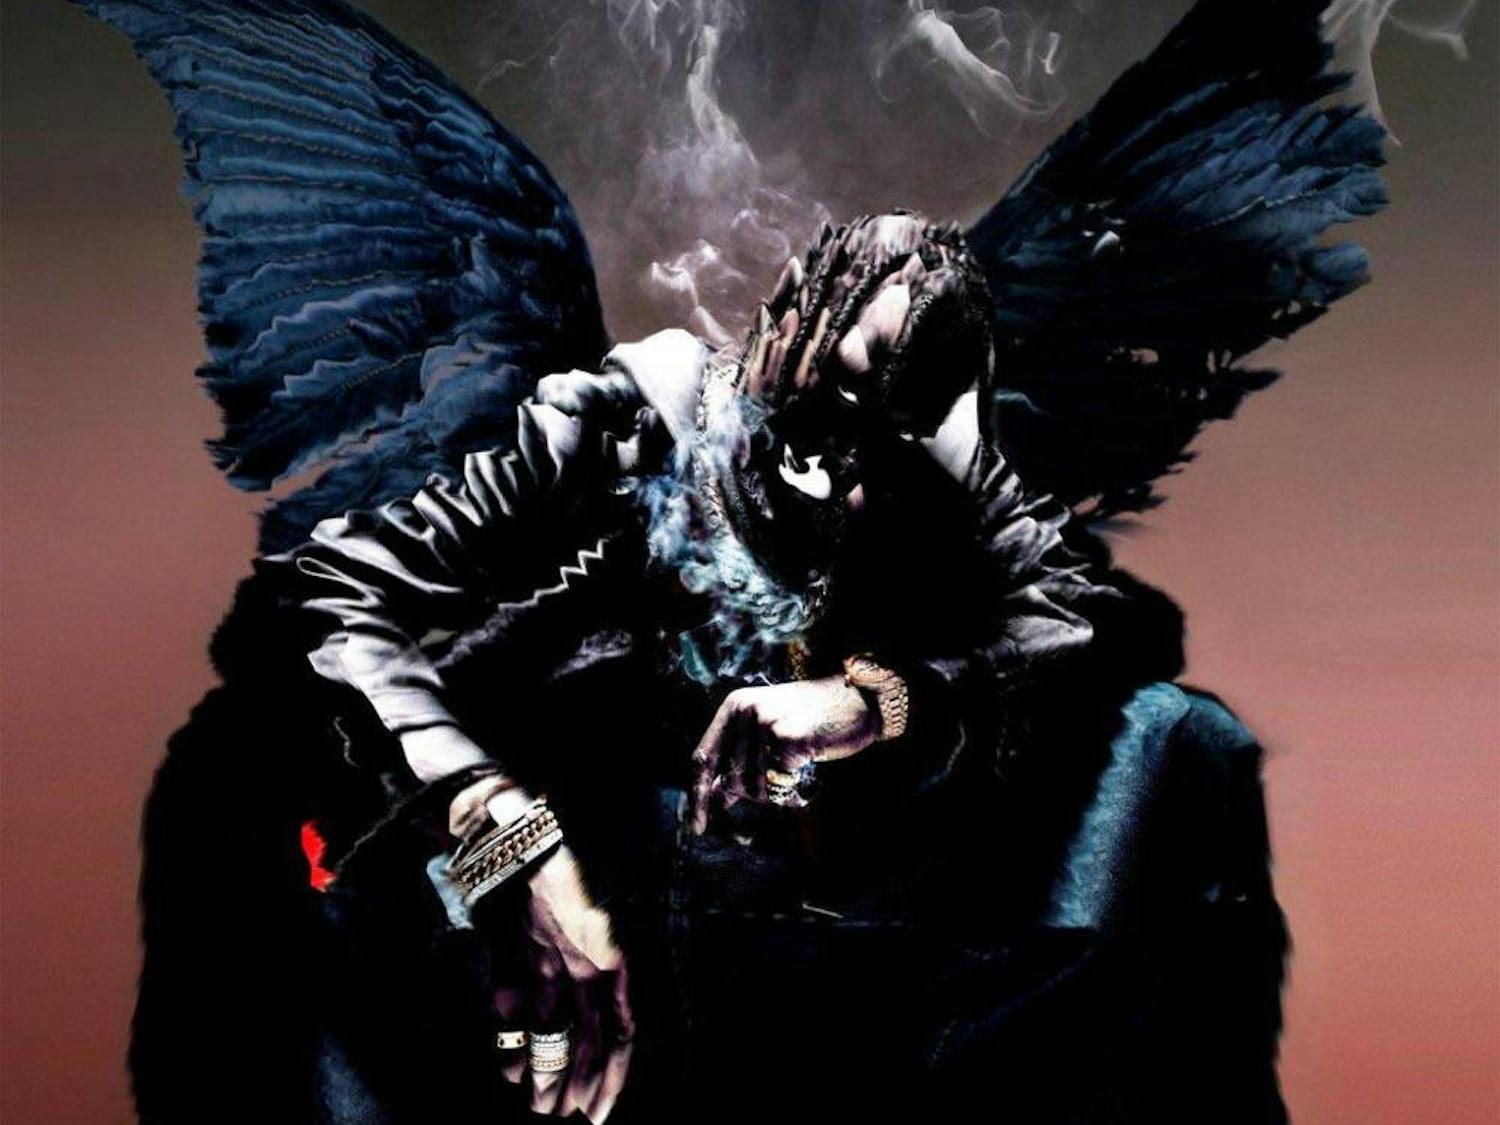 Travis Scott's second album&nbsp;Birds in the Trap Sing McKnight dropped on Sept. 2, right before he headlines UB's Fall Fest one week after.&nbsp;